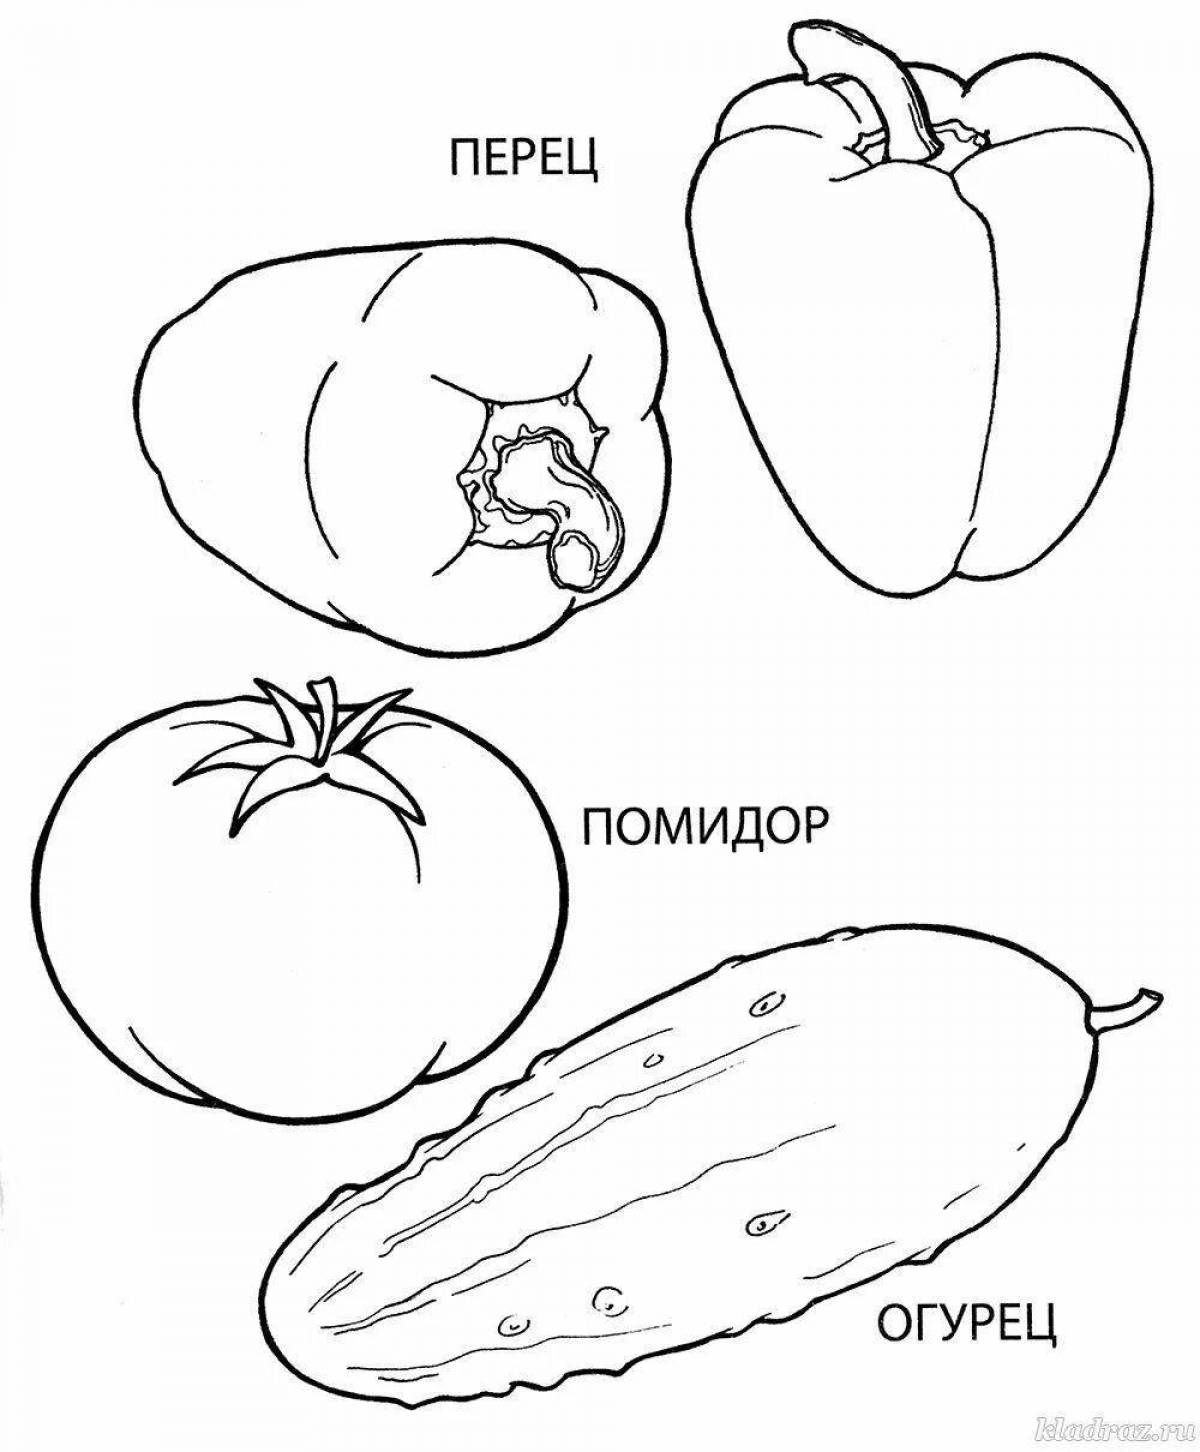 Exciting squash coloring page